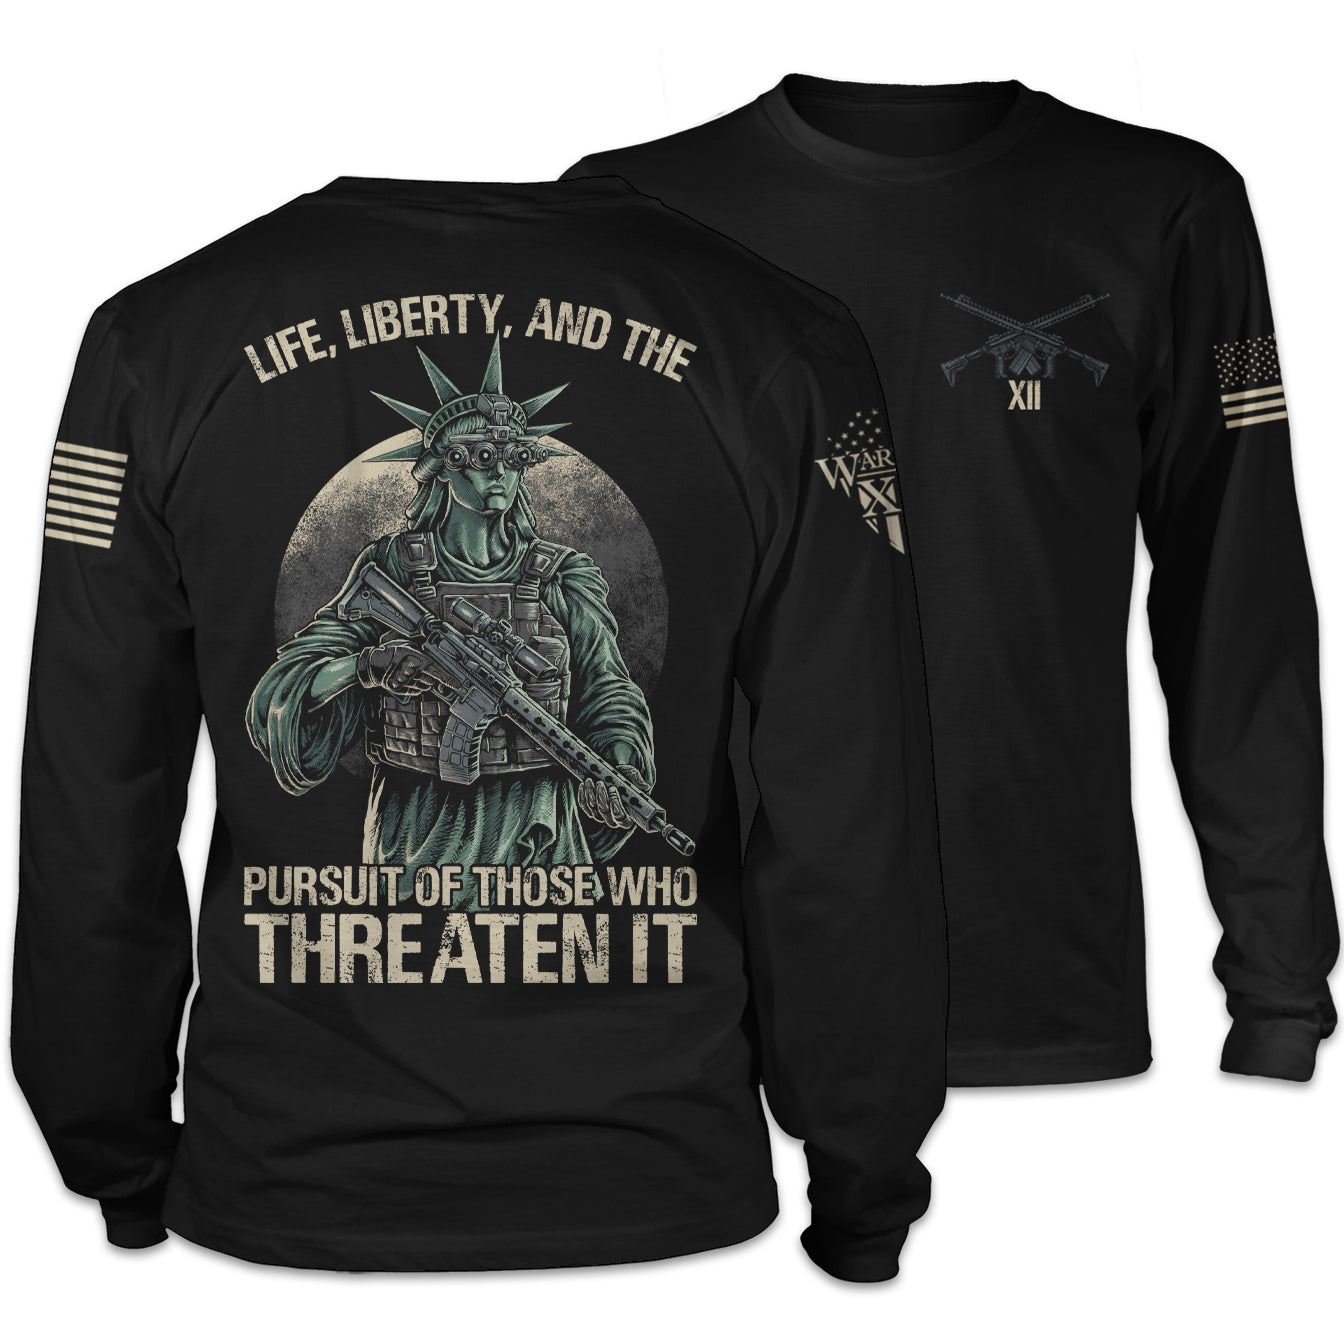 Front and back black long sleeve shirt with the words "Life, liberty, and the pursuit of those who threaten it" with the statue of liberty holding a gun printed on the shirt.